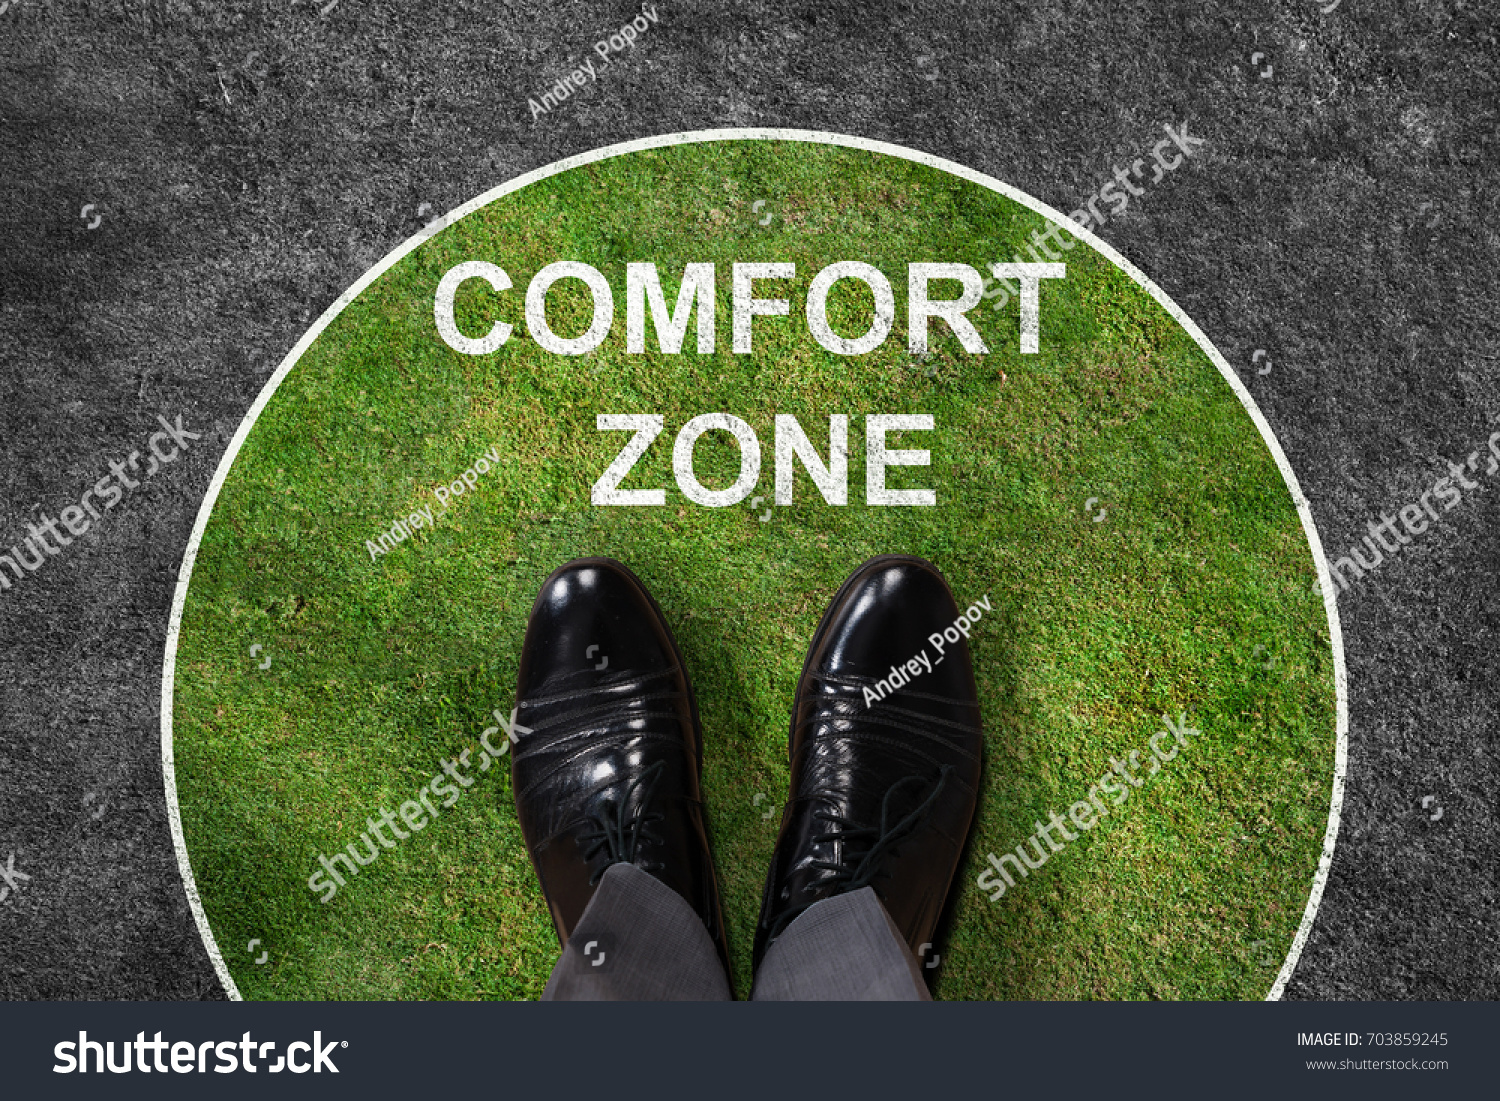 Businessman standing on green and gray carpet with comfort zone text on it #703859245